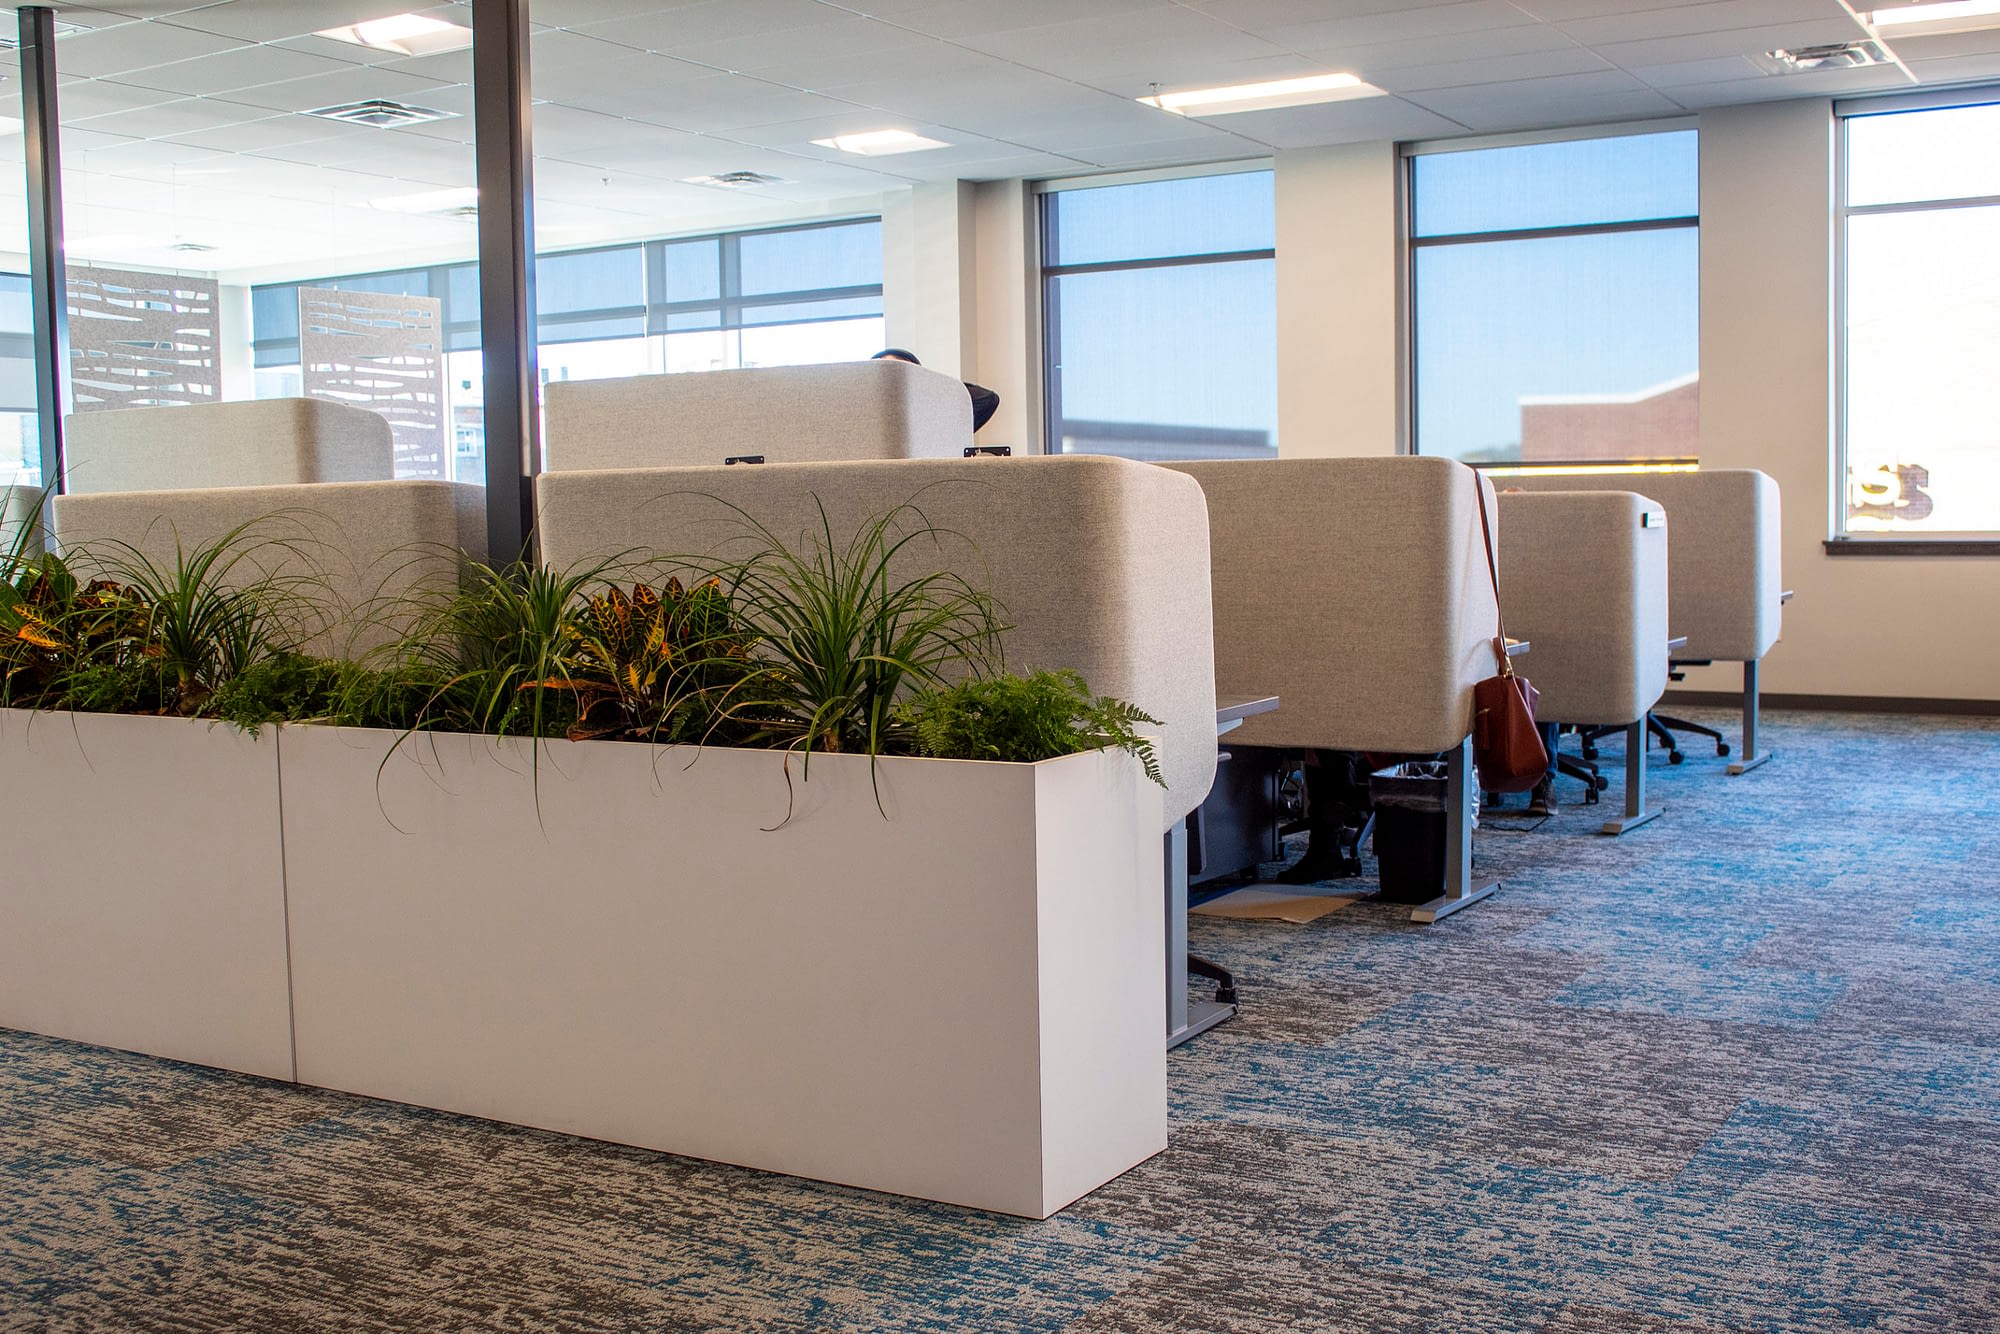 allsteel a8 workstations and planters